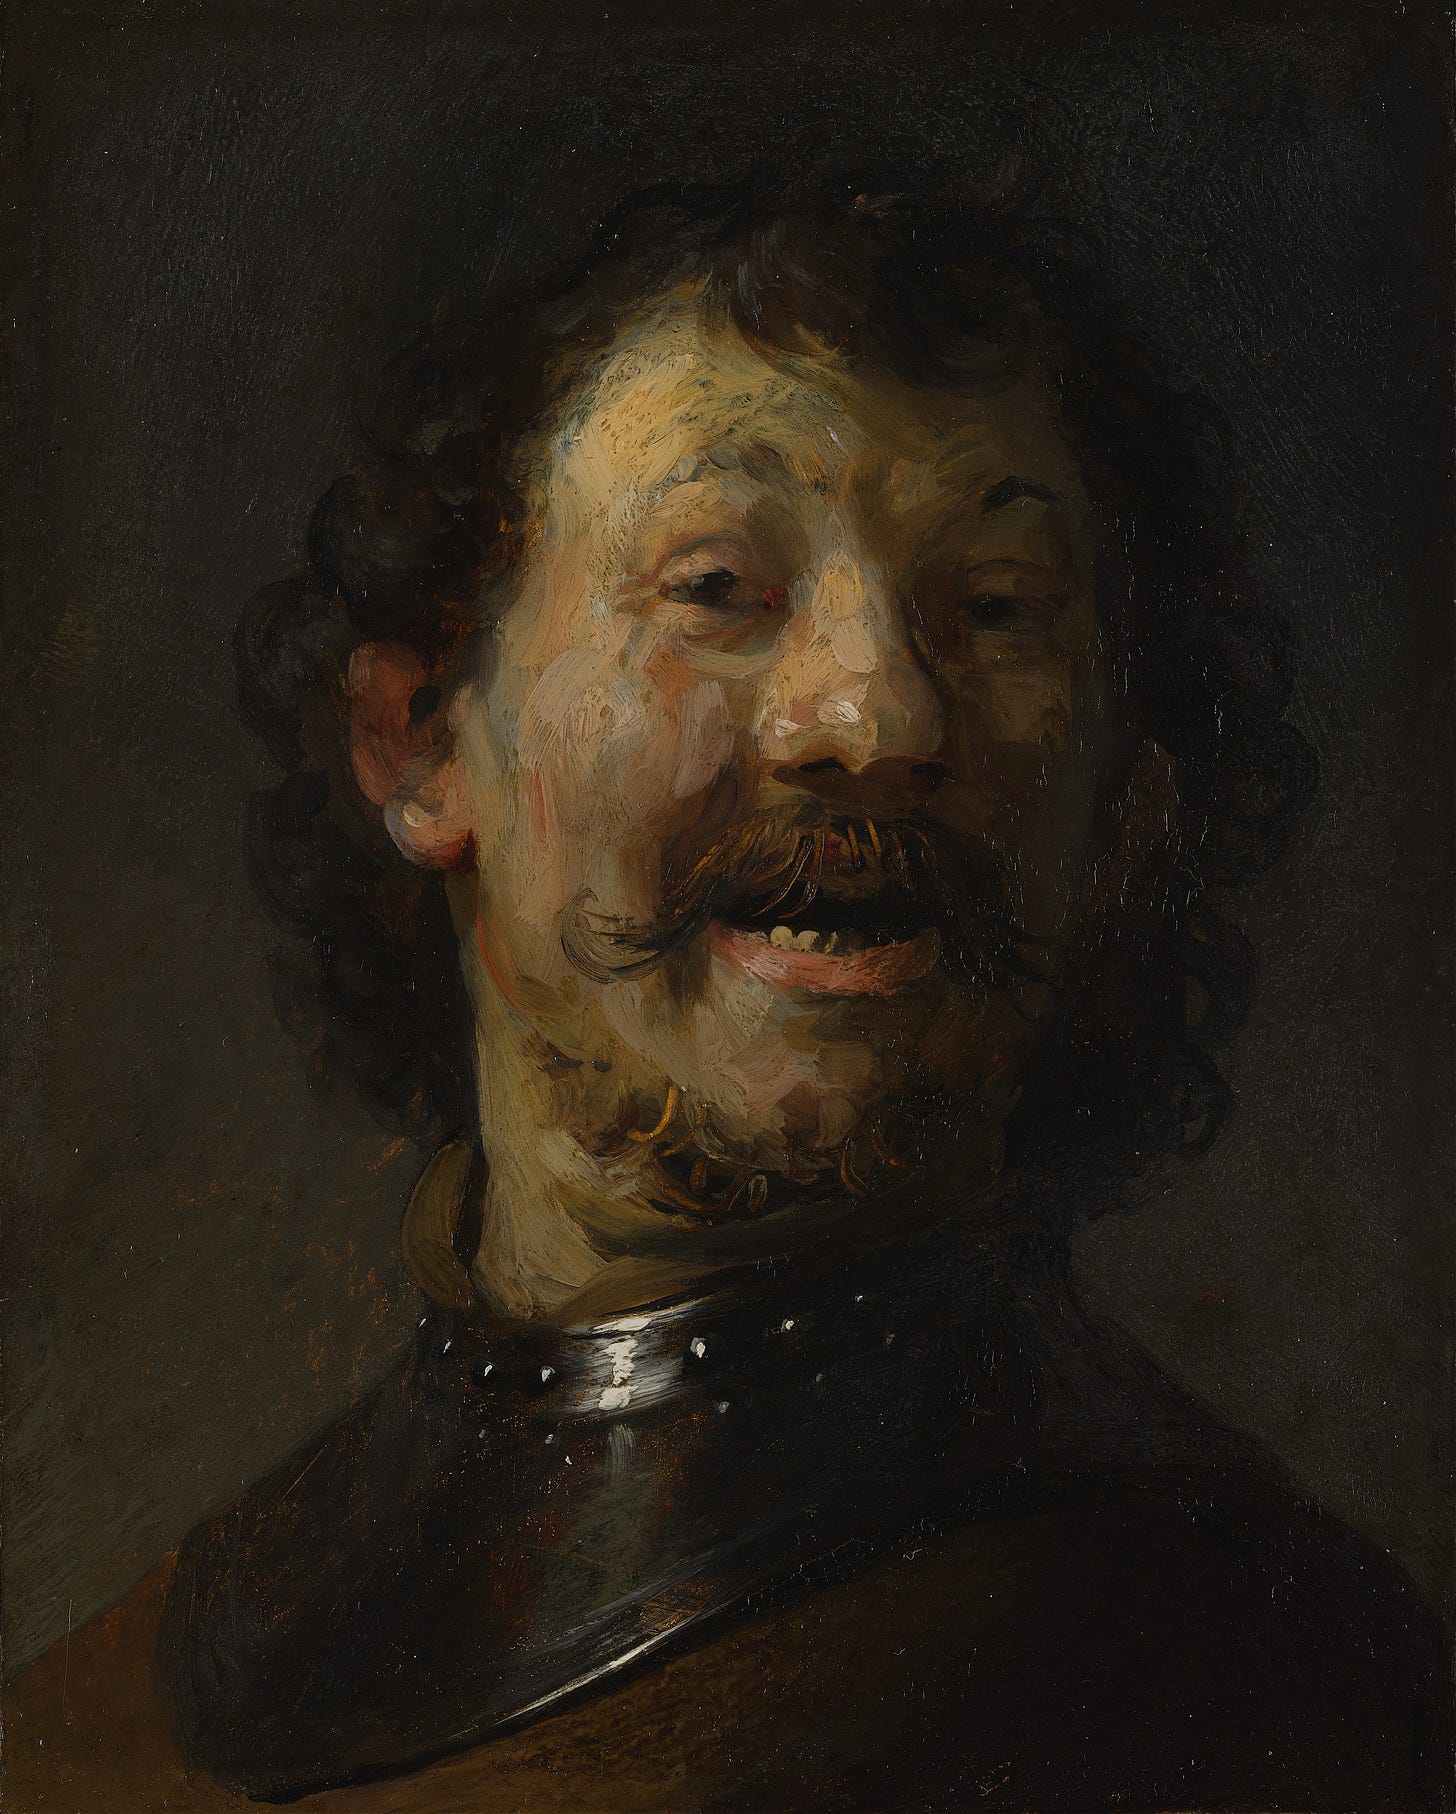 The Laughing Man (c. 1629 - 1630) by Rembrandt van Rijn